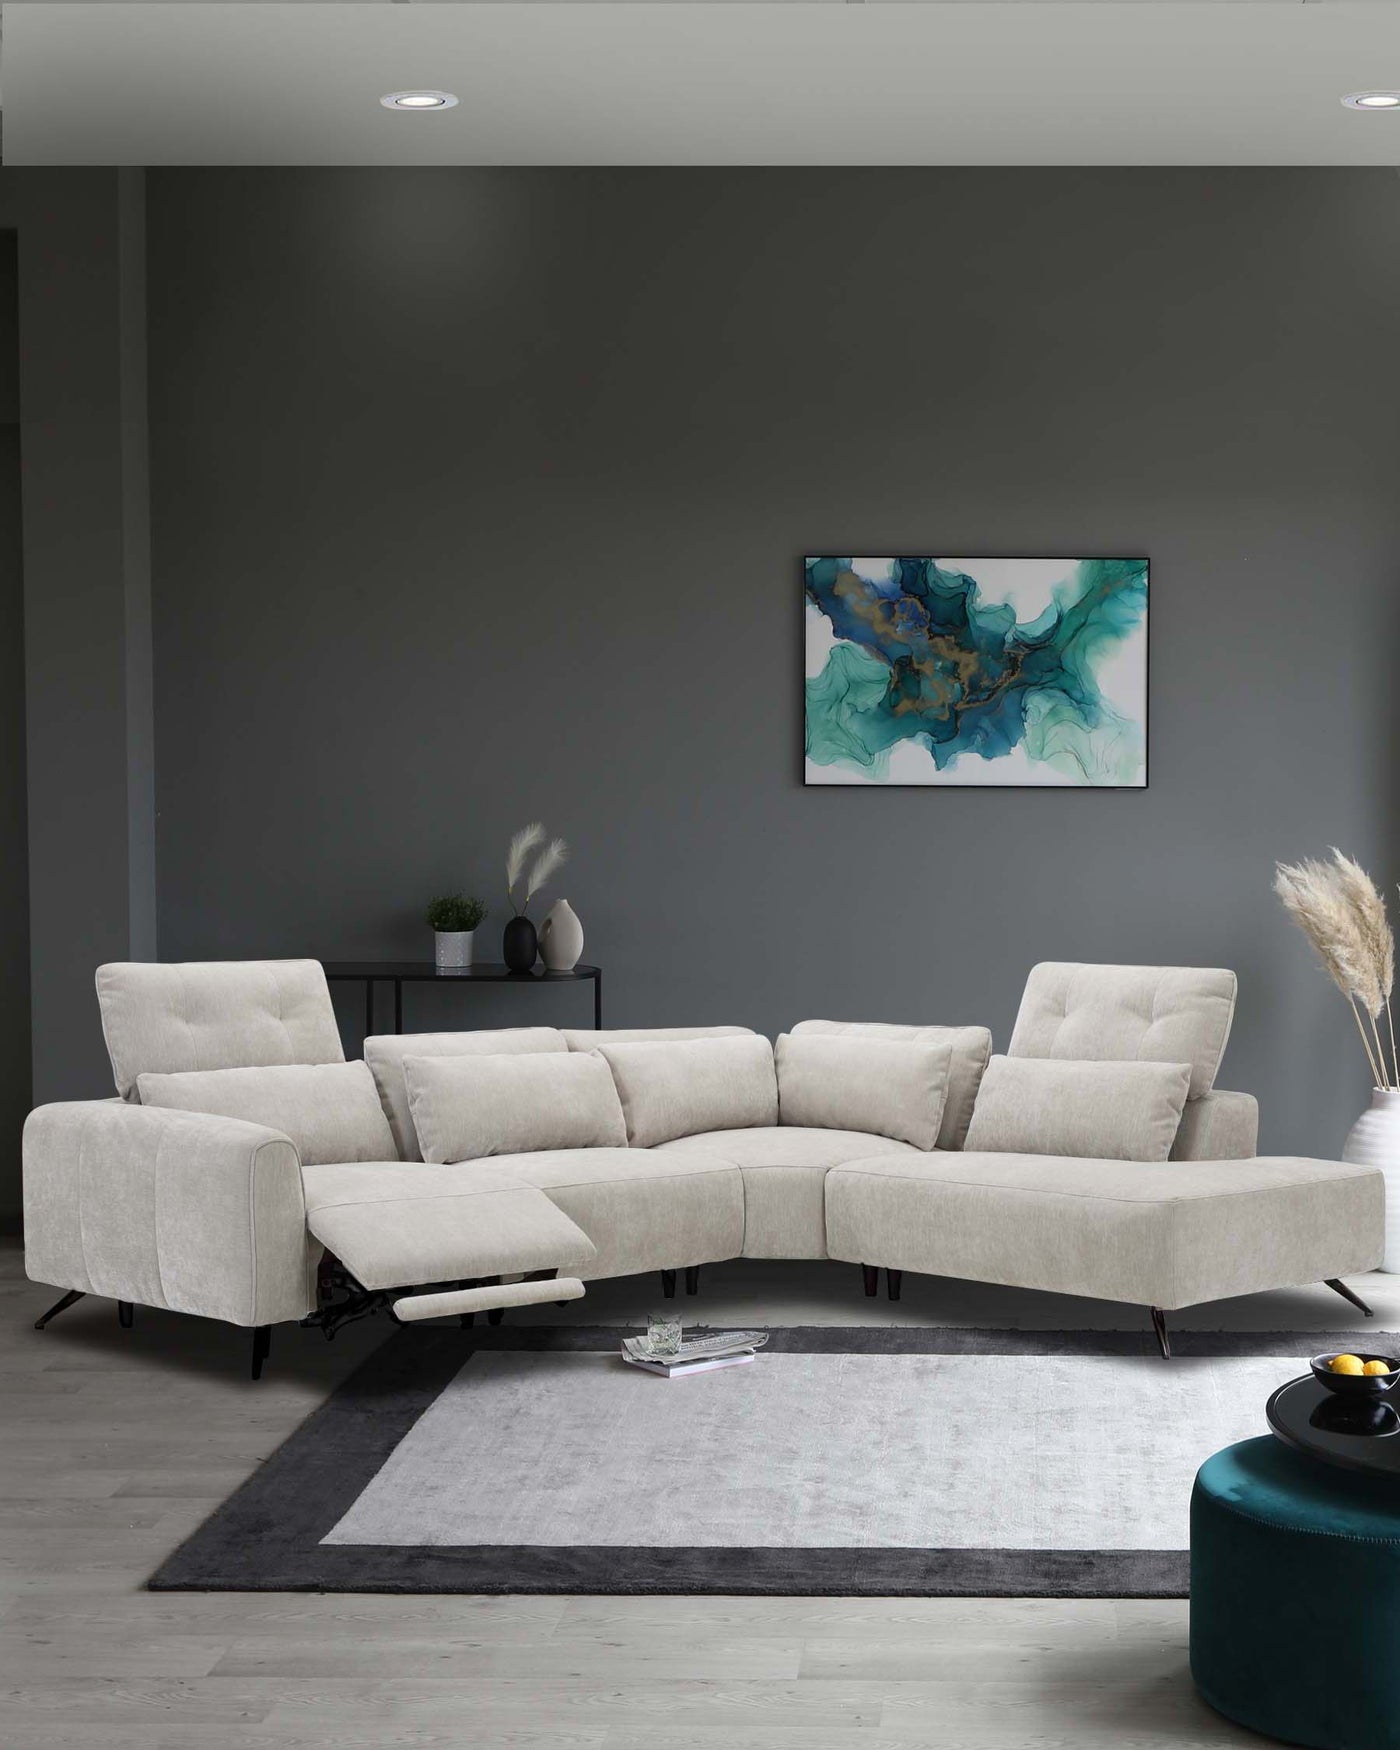 Modern light beige upholstered sectional sofa with adjustable headrests and a chaise lounge end, set on a large off-white and dark grey area rug, accompanied by a circular dark green ottoman and a sleek black side table holding decorative items.